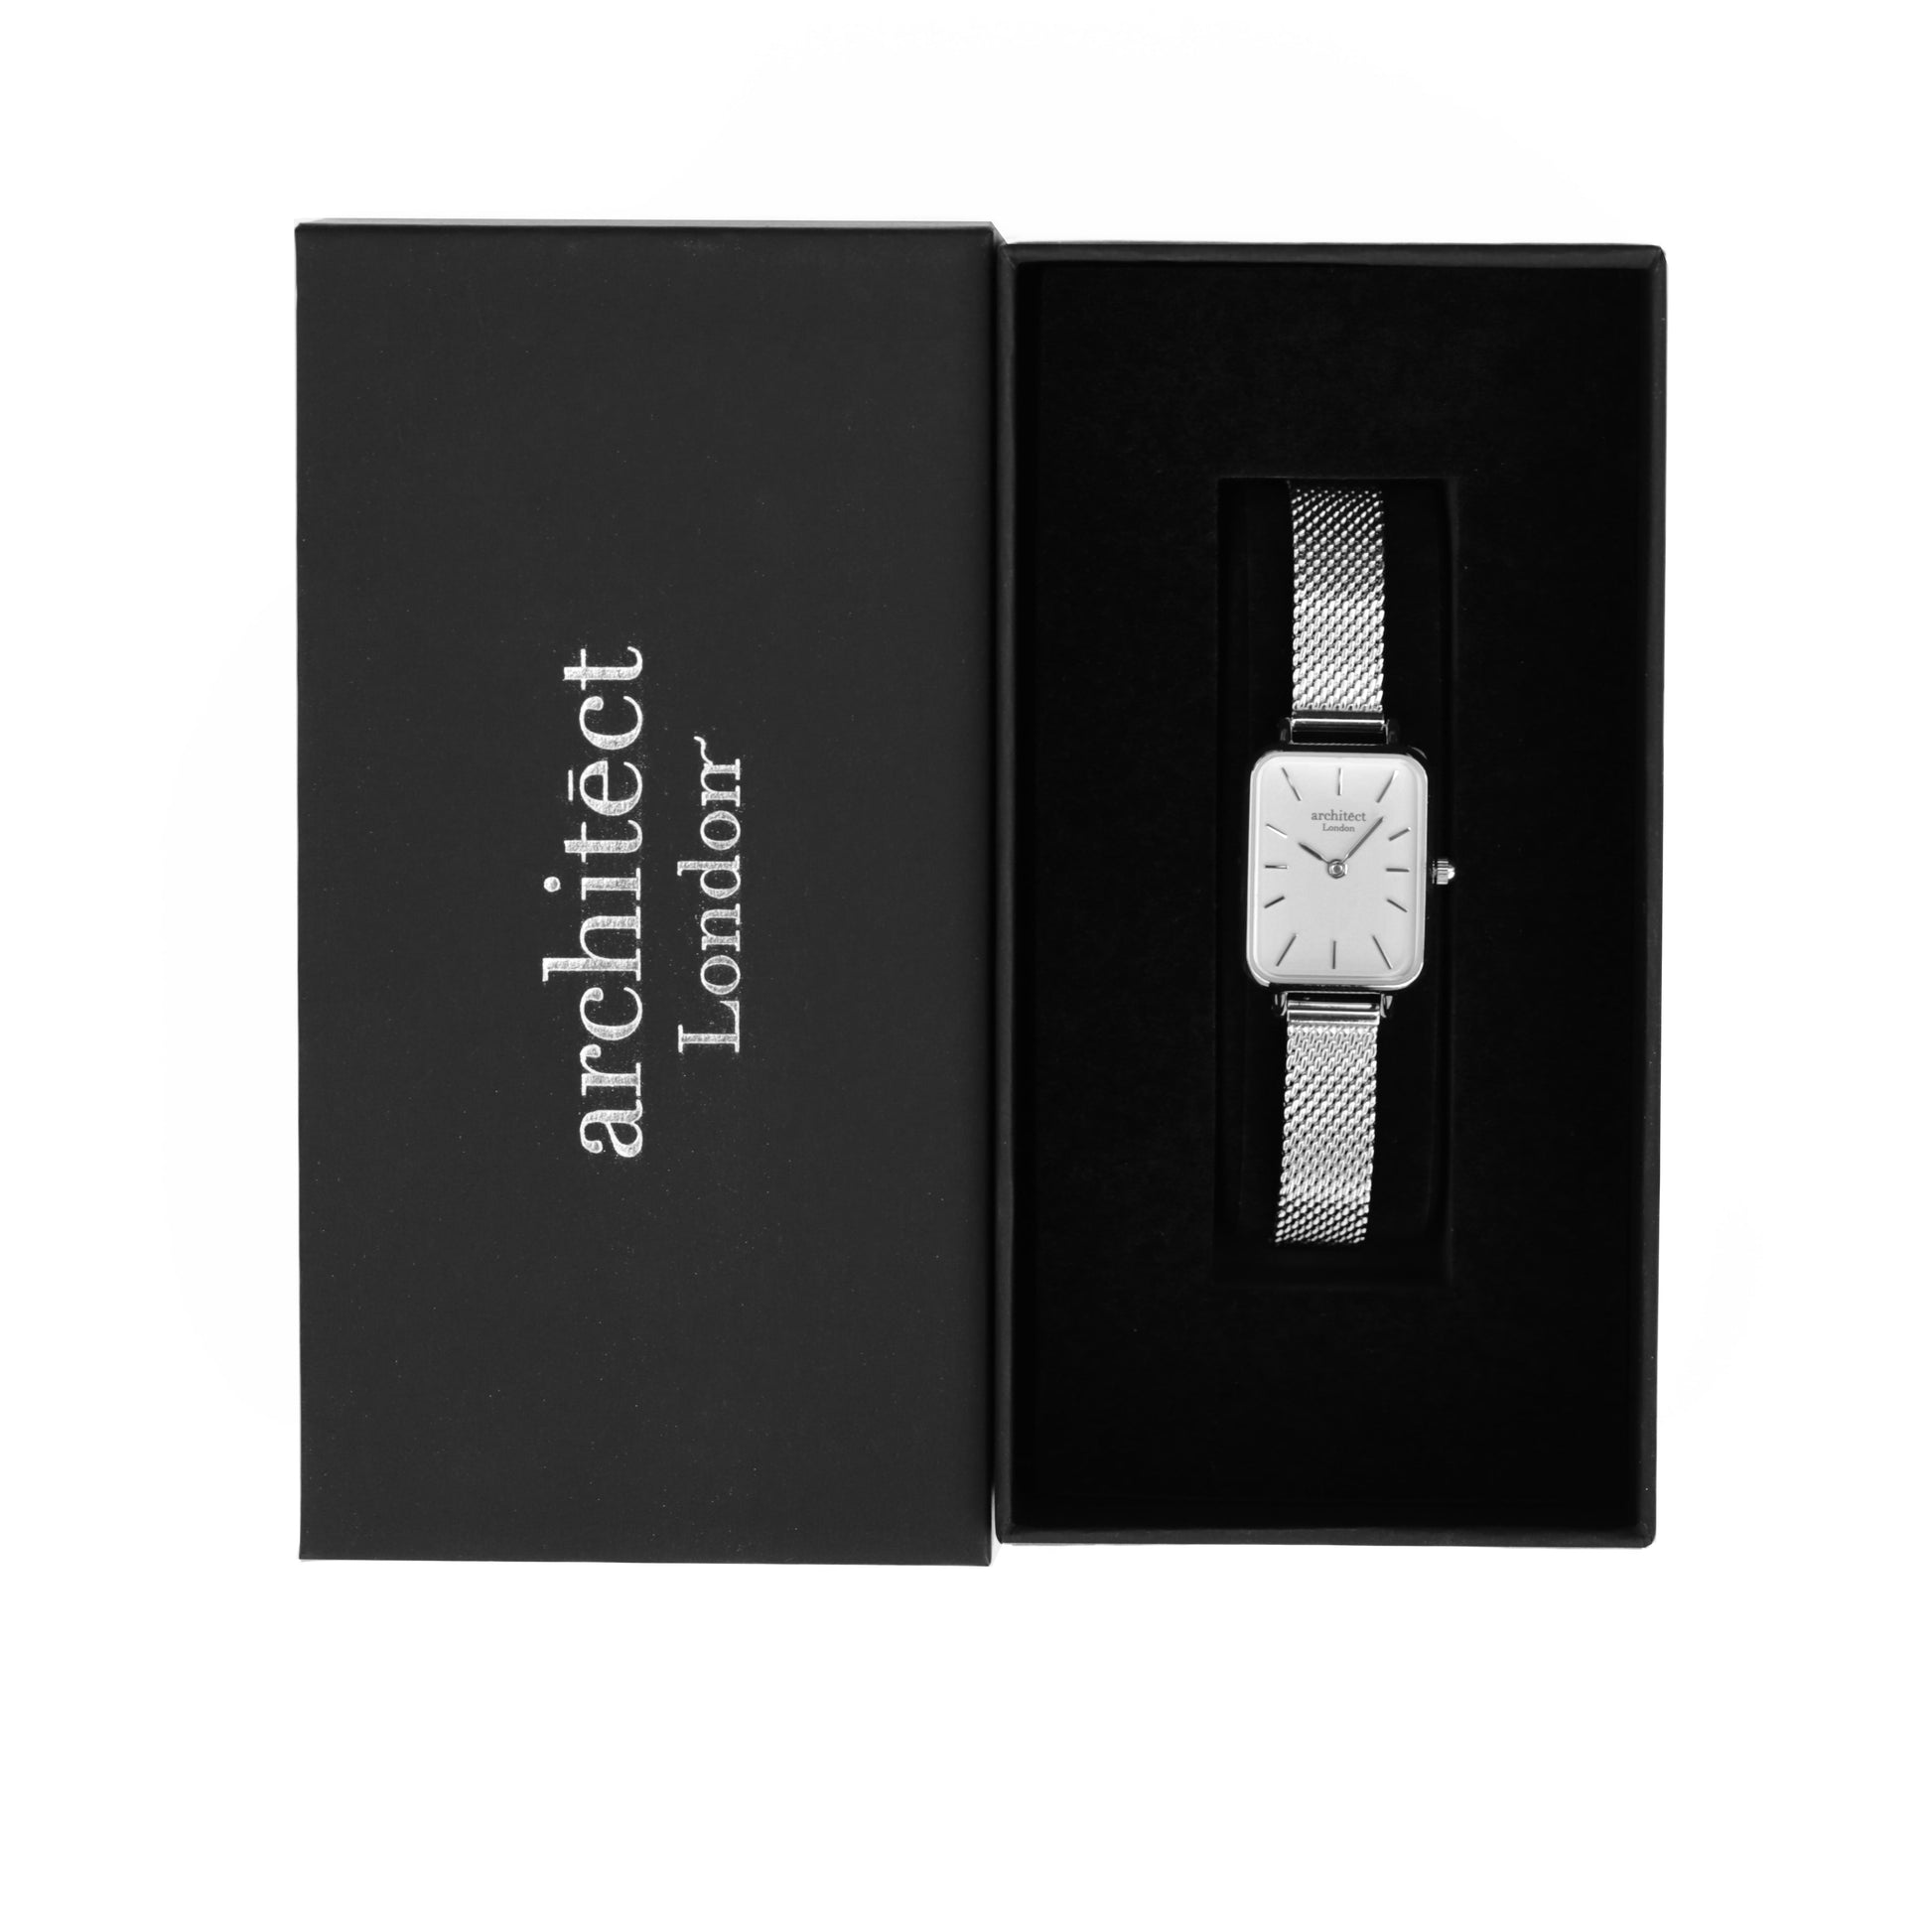 Personalized Ladies' Watches - Ladies Architēct Lille Engraved Watch In Cloud Silver 